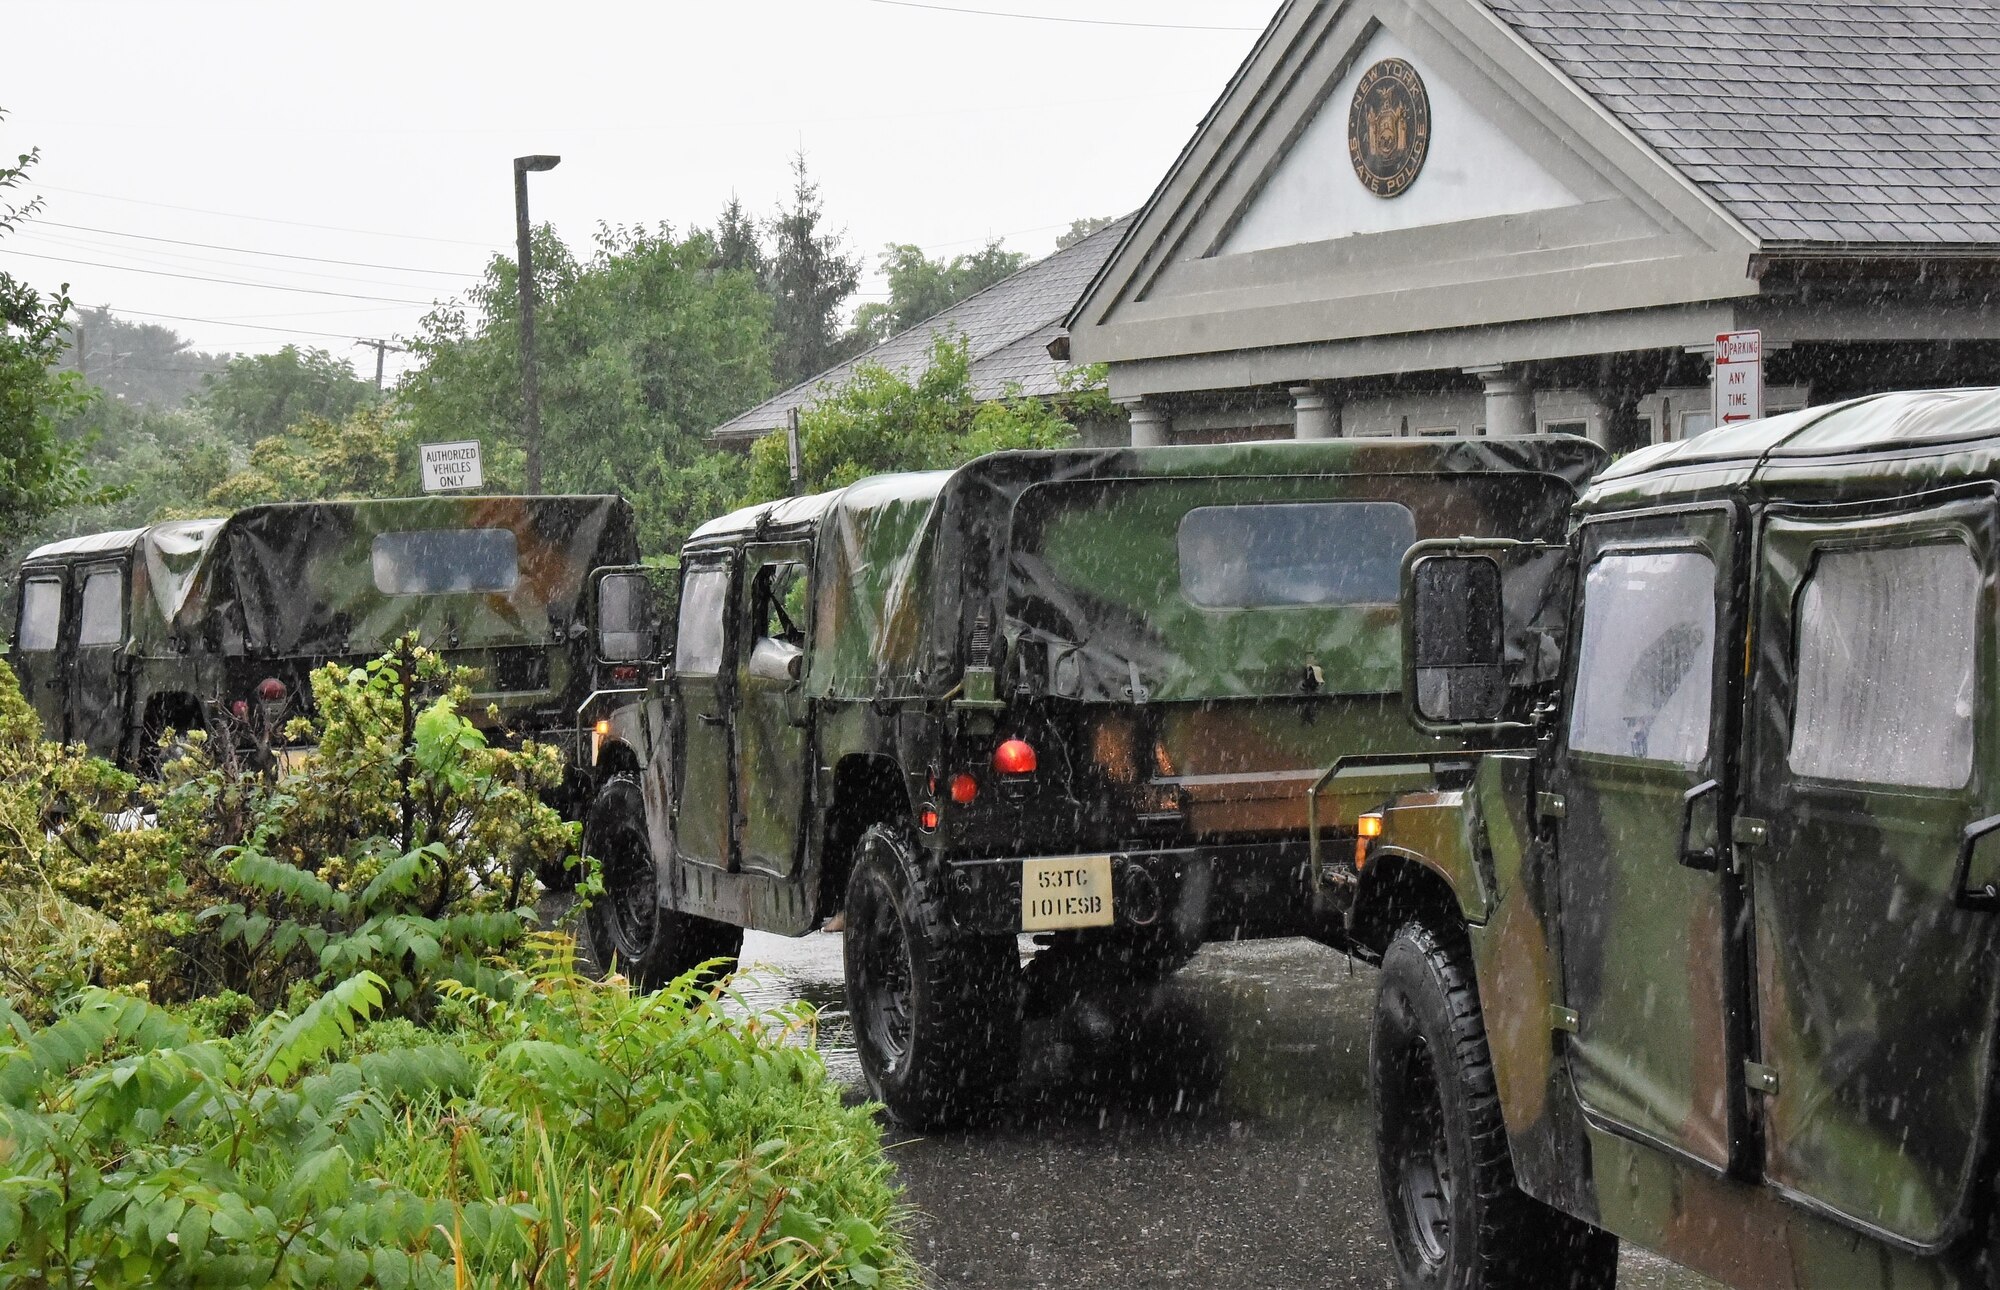 Humvees in front of the New York State Police Troop L in Brentwood, New York, Aug. 22, 2021, as part of the New York National Guard response to the anticipated landfall of Tropical Storm Henri. The Guard activated 500 Soldiers and Airmen on Long Island, New York City and in the Hudson Valley and Albany area to respond to any government requests for assistance.